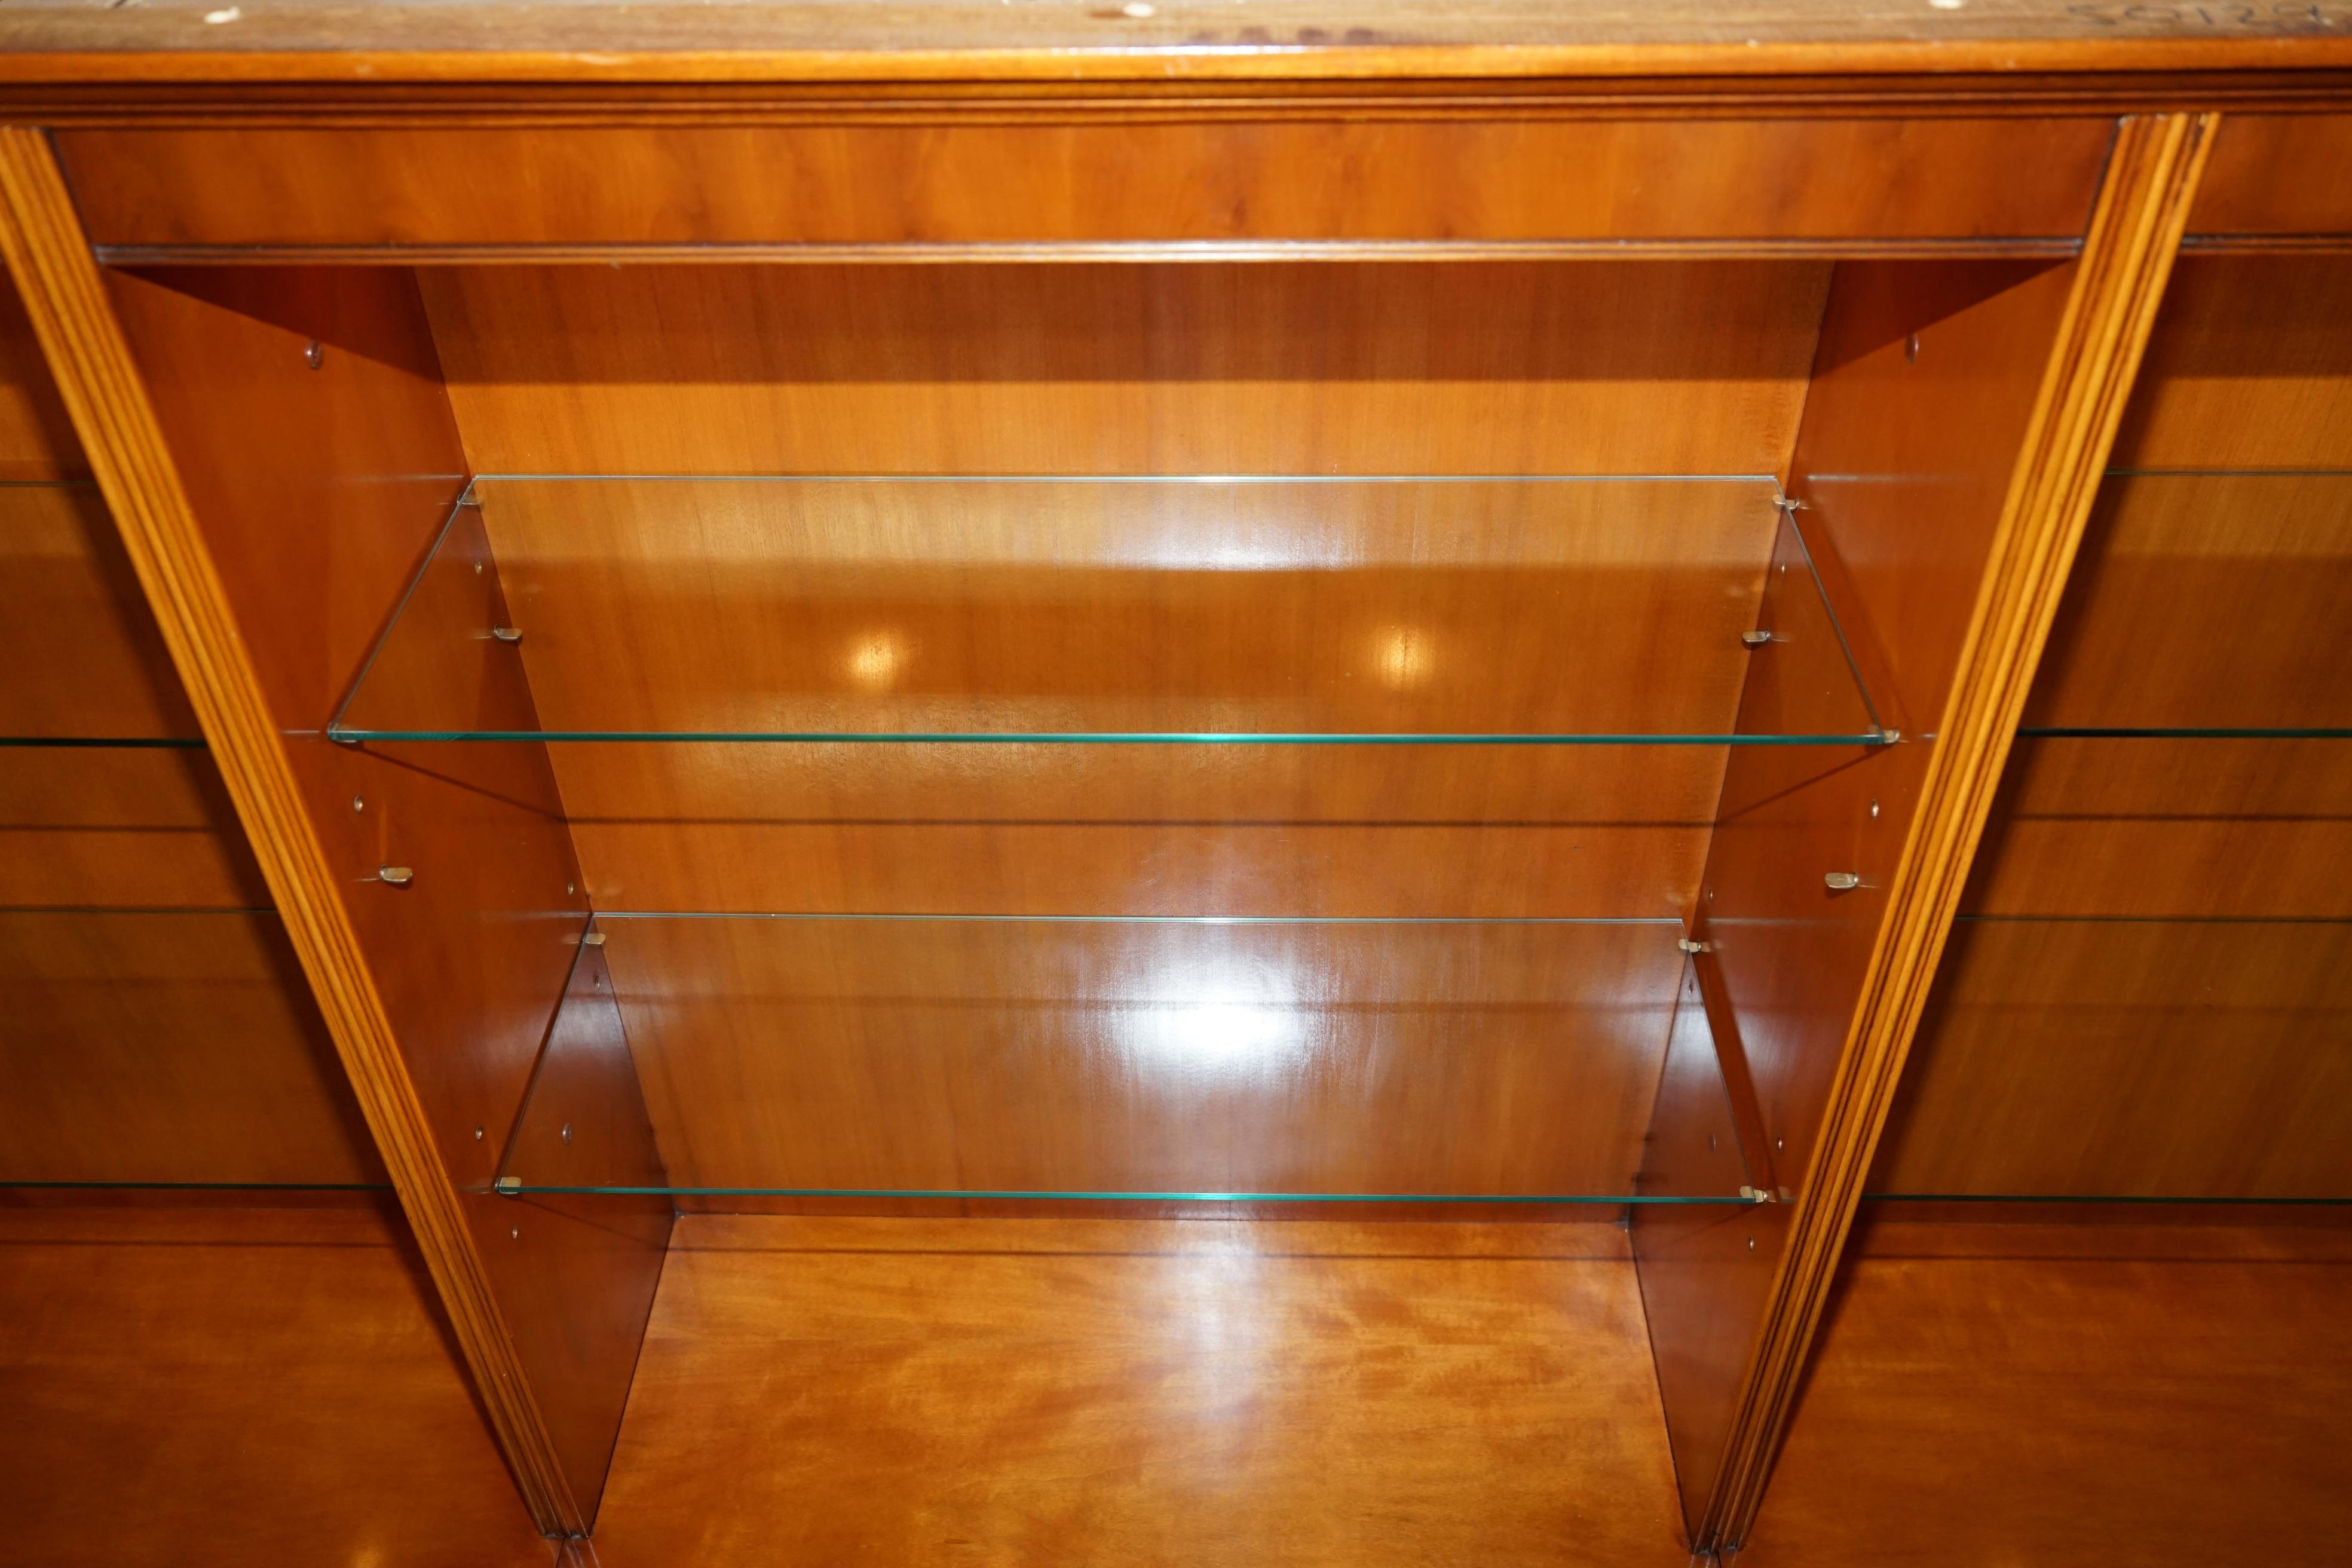 Triple Bank Bradley Furniture Burr Yew Wood Library Display Bookcase with Lights 2